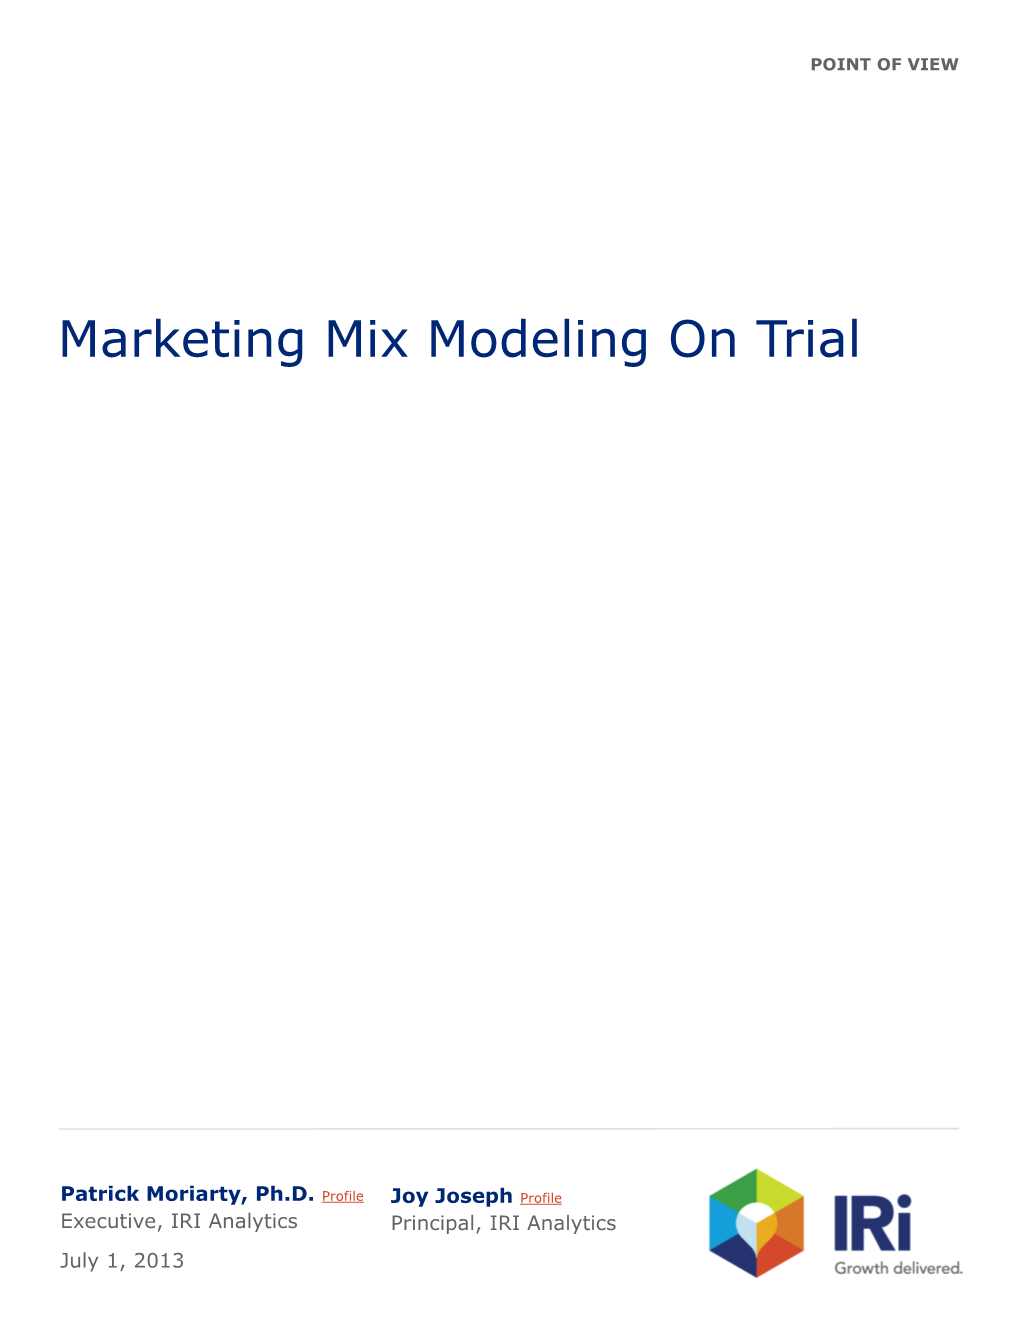 Marketing Mix Modeling on Trial